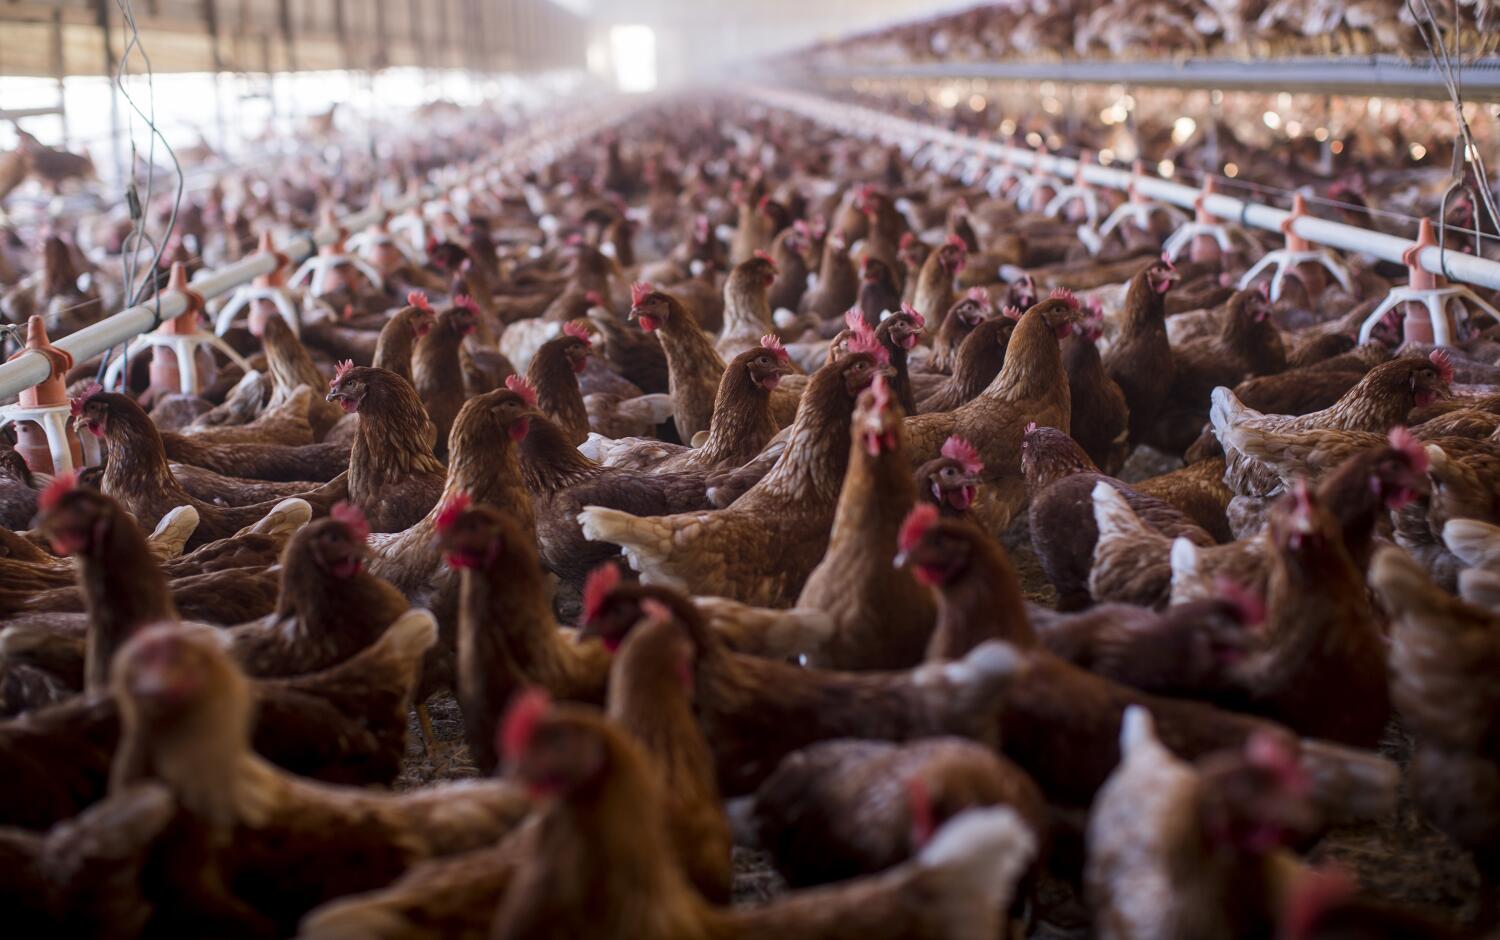 avian-flu-outbreak-raises-a-disturbing-question:-is-our-food-system-built-on-poop?